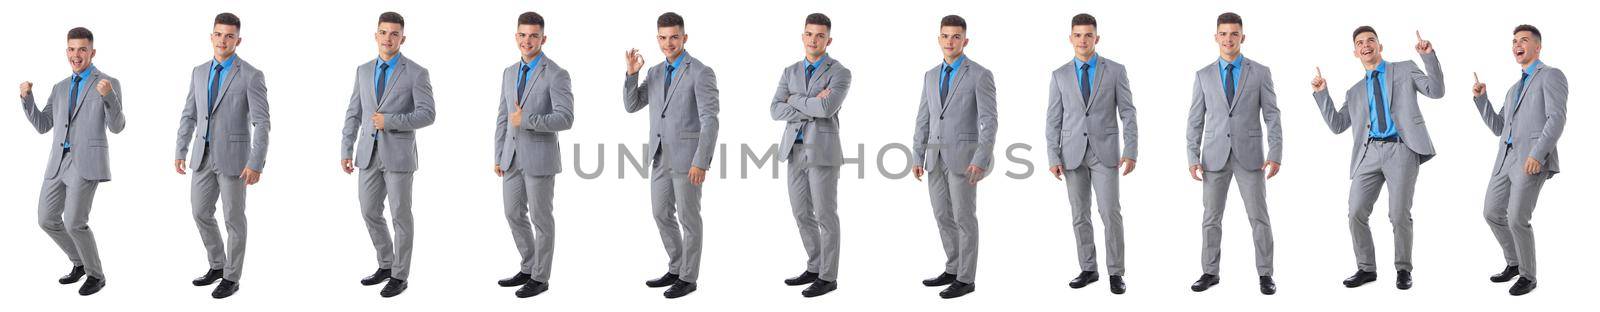 Set of young business man portraits by ALotOfPeople